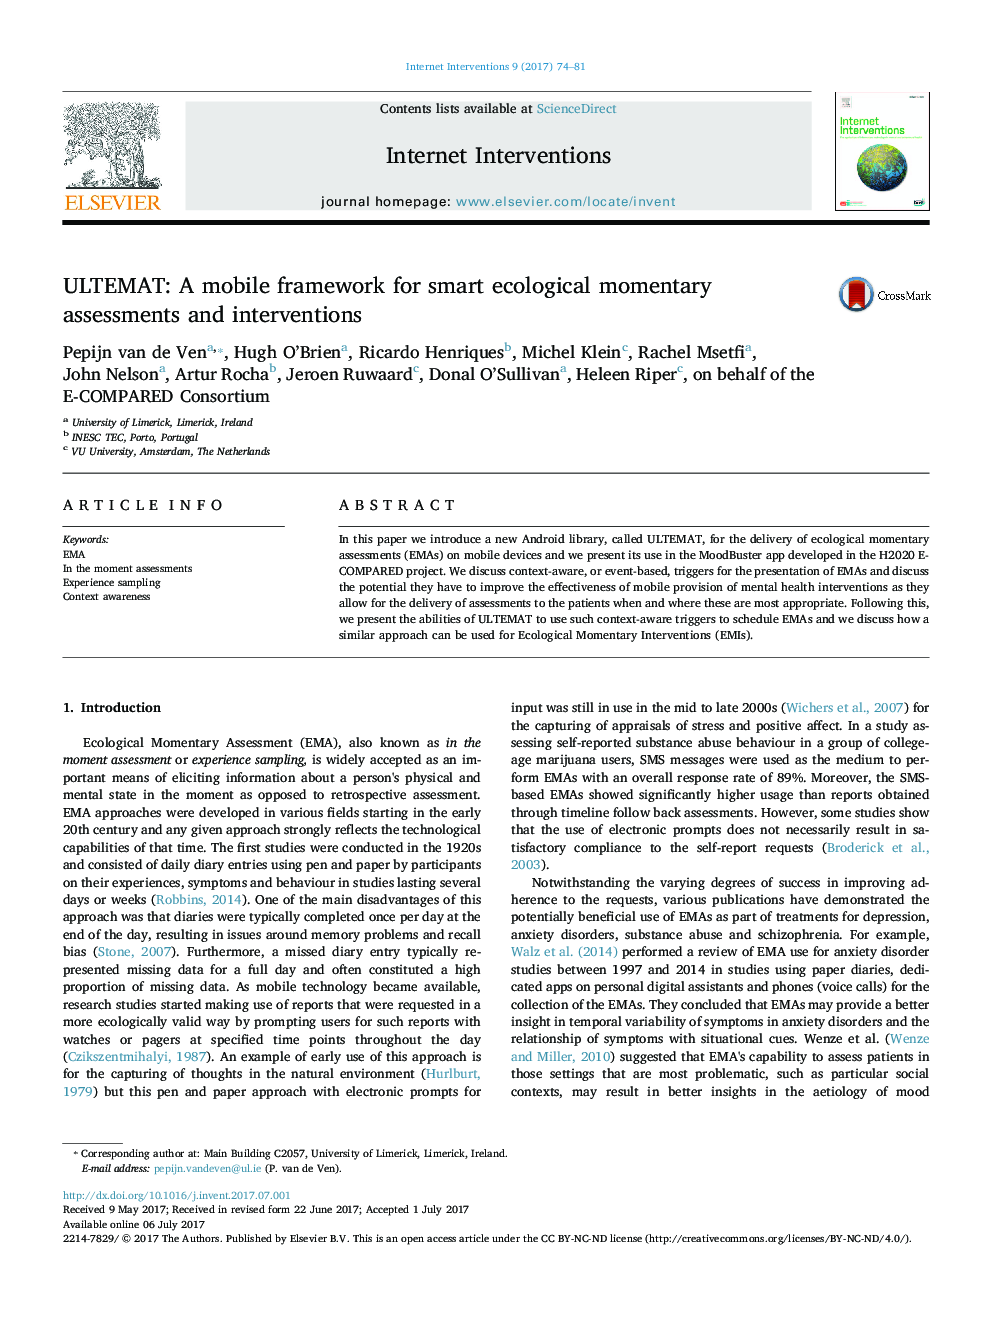 ULTEMAT: A mobile framework for smart ecological momentary assessments and interventions